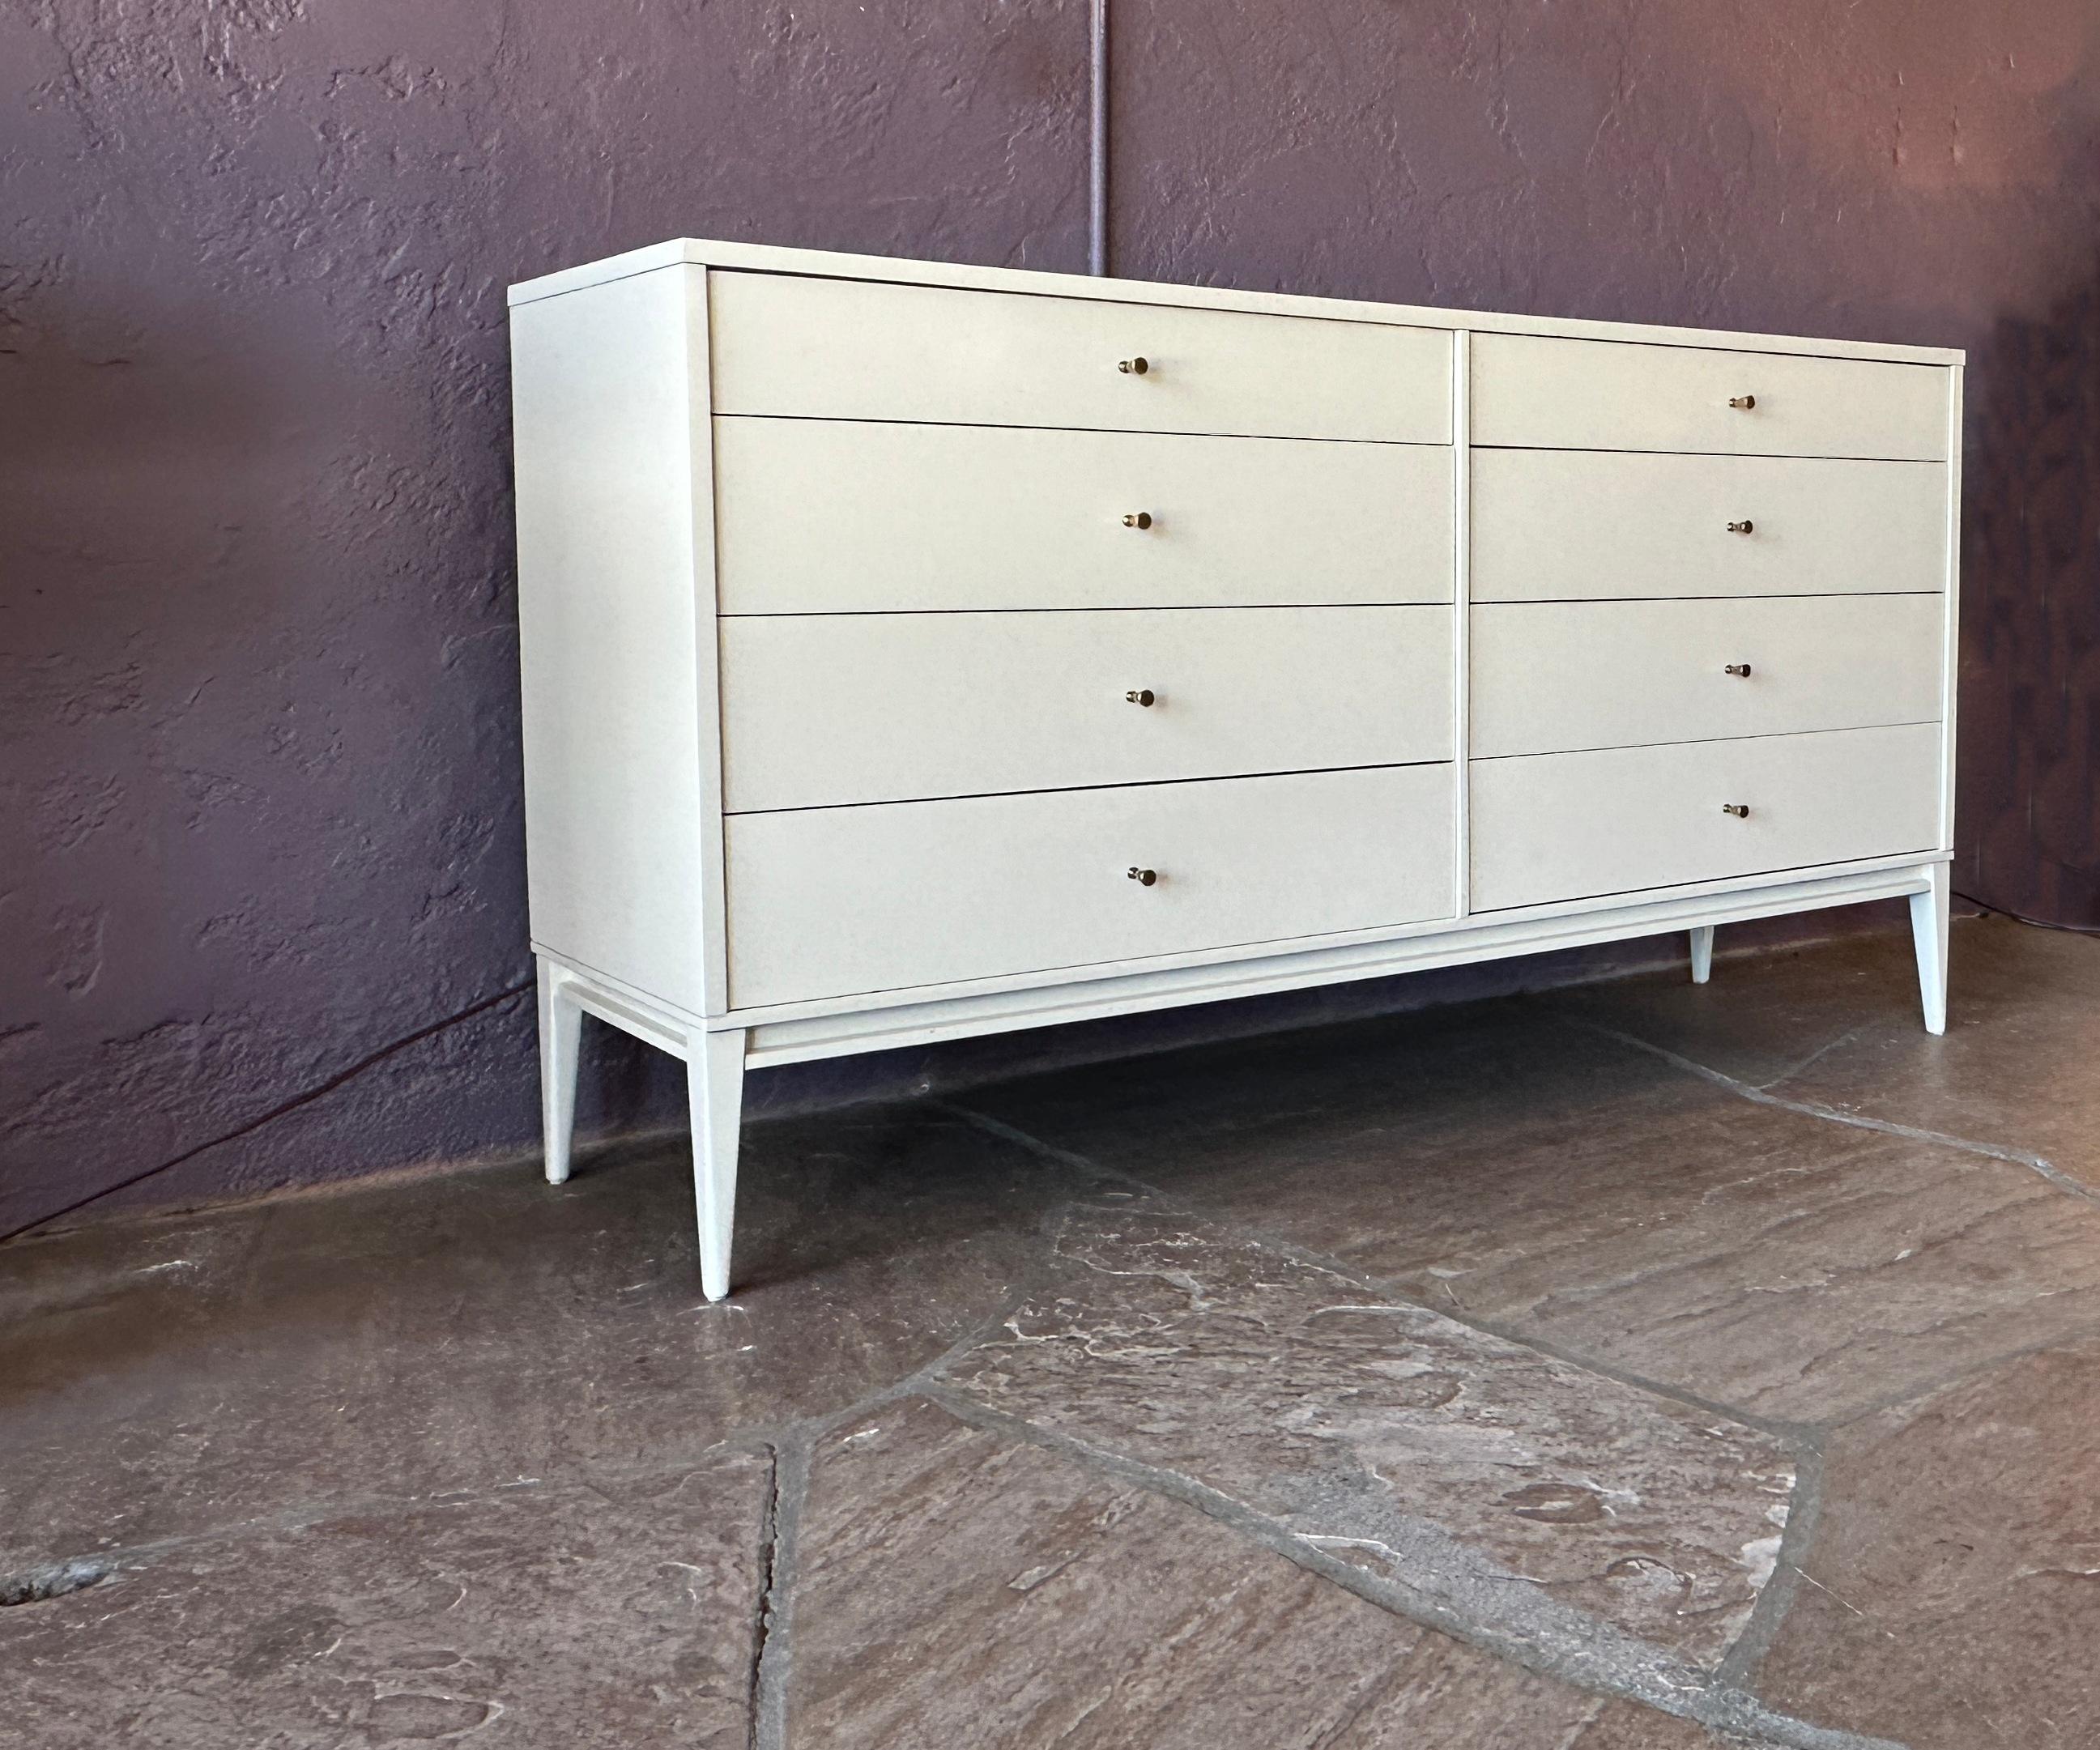 This elegant white lacquer Paul McCobb dresser features 8 drawers with simple chromed knobs.